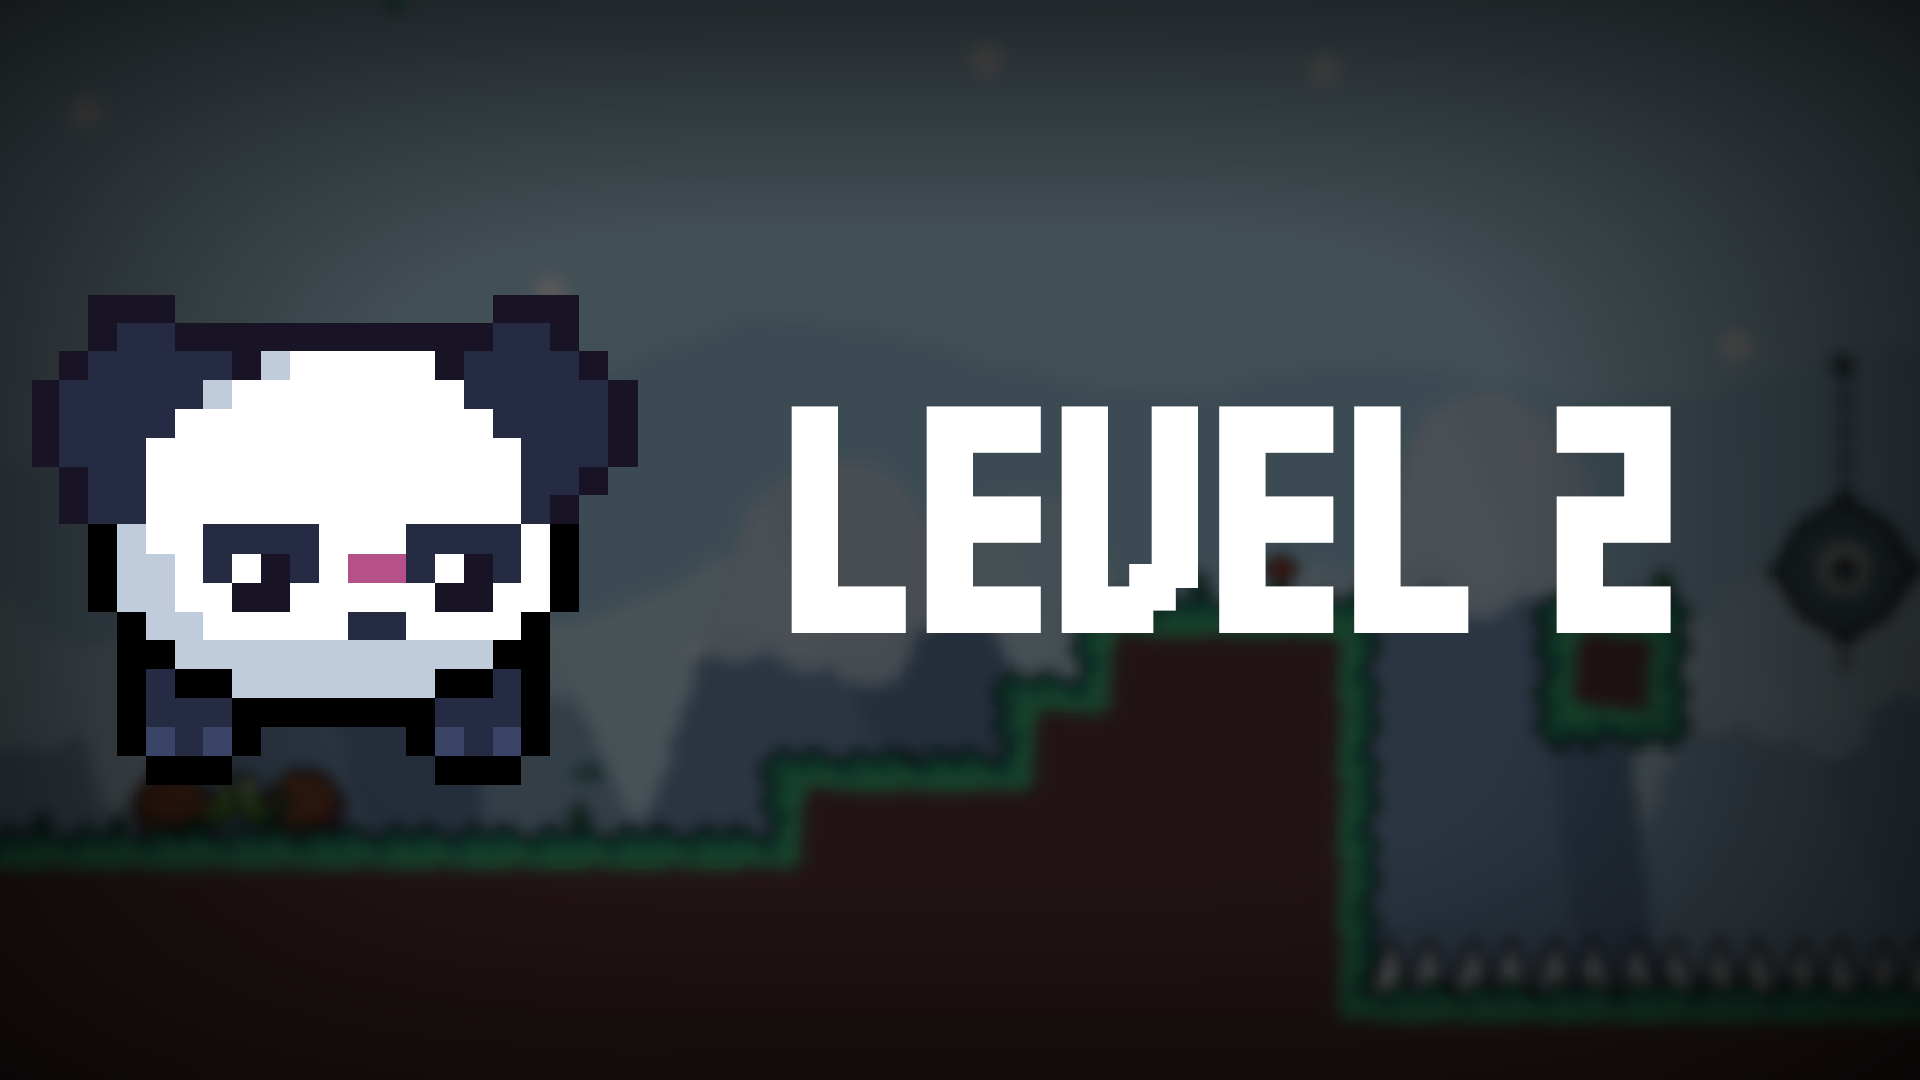 Icon for Level 2